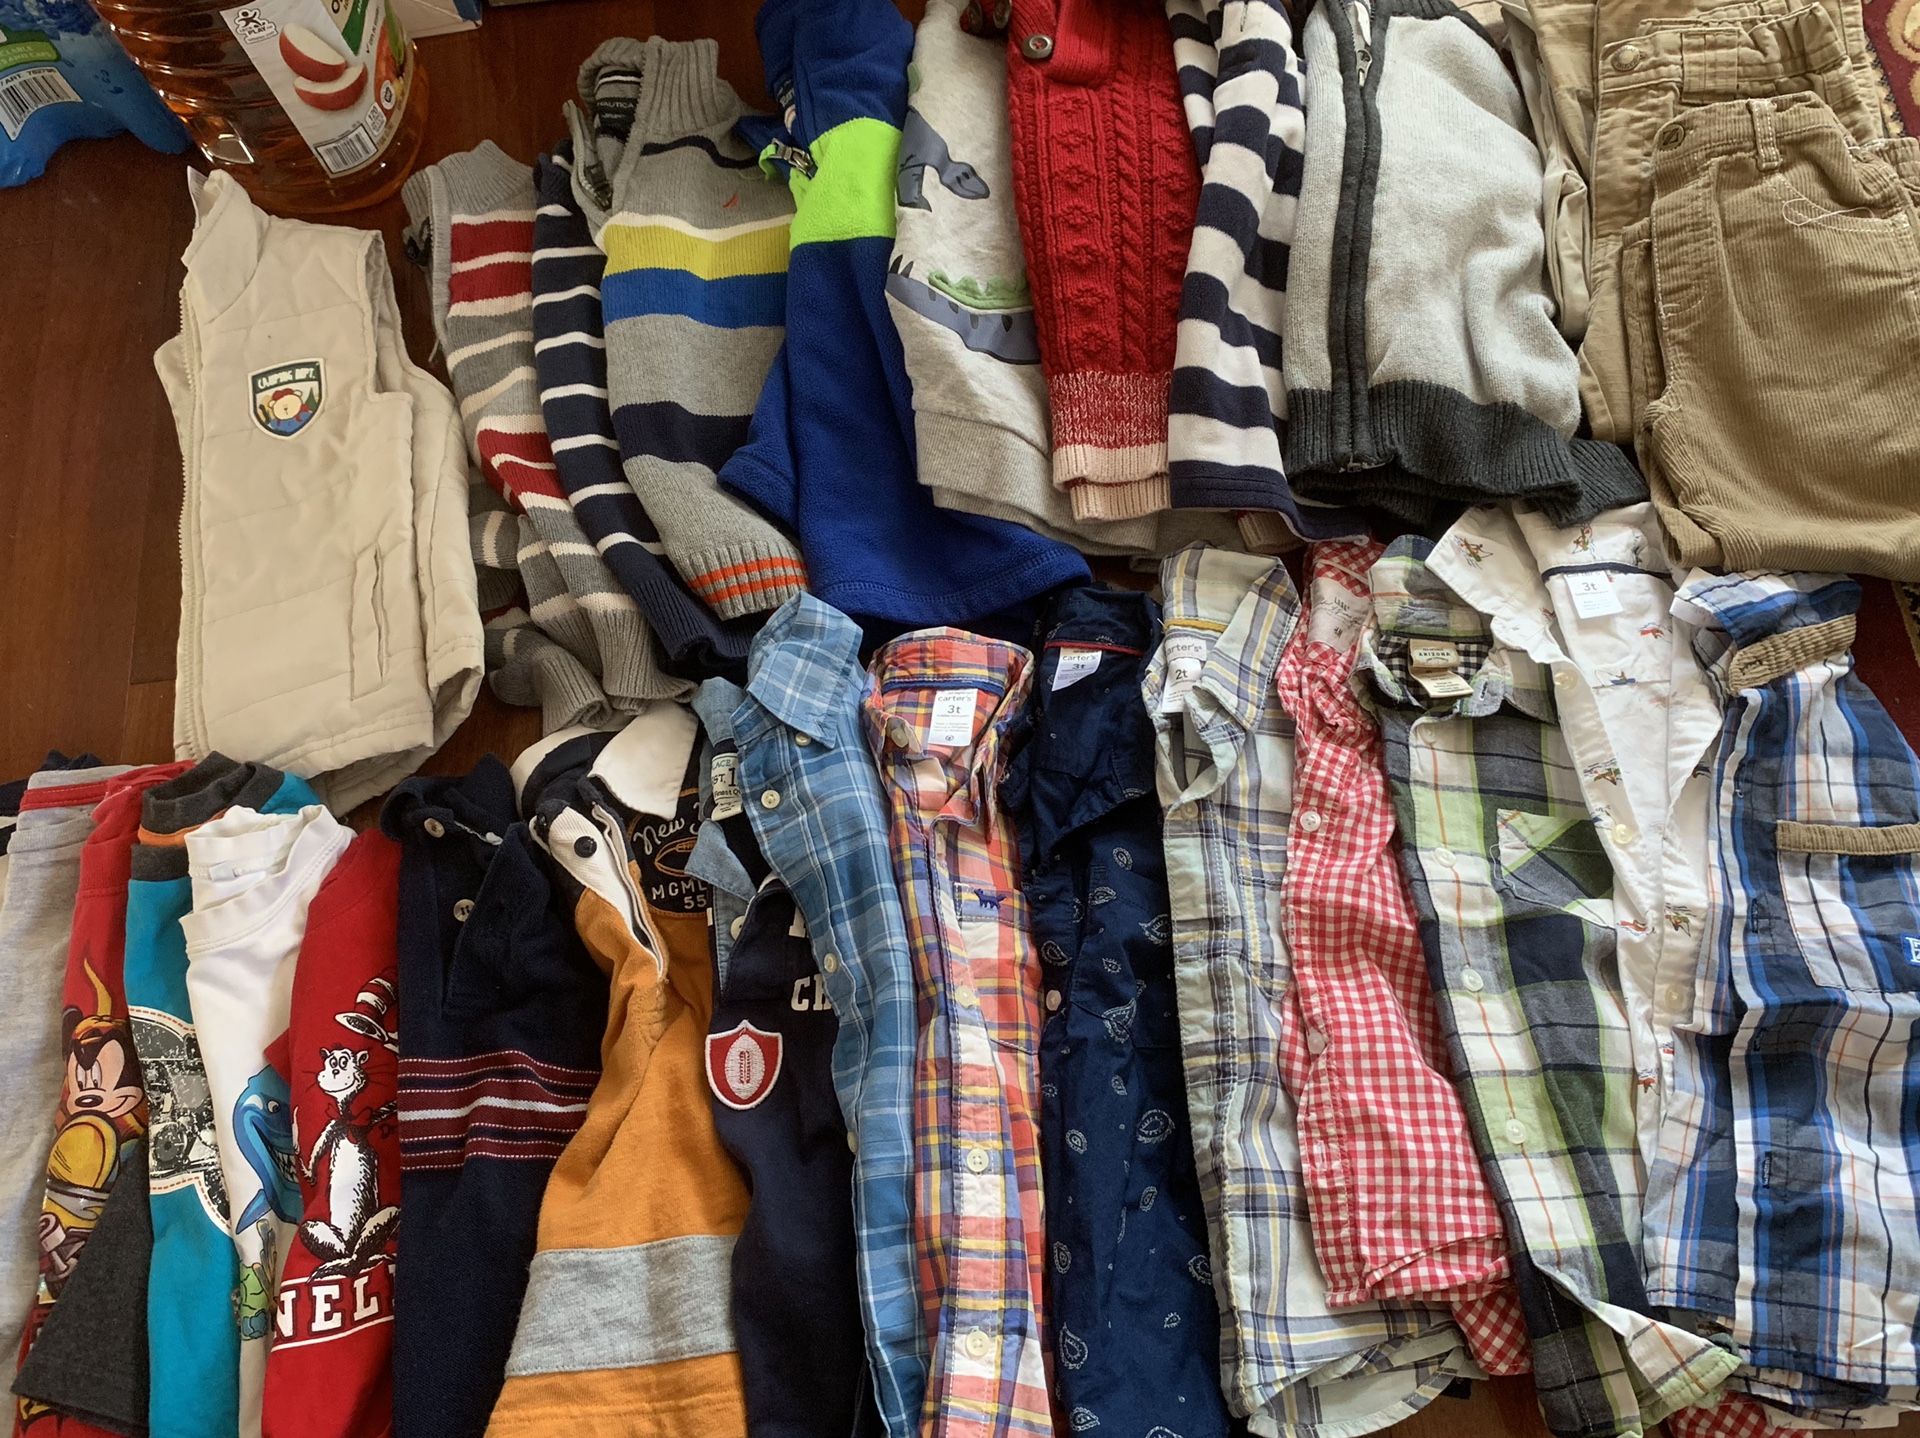 Boys clothes size 3T and 5T